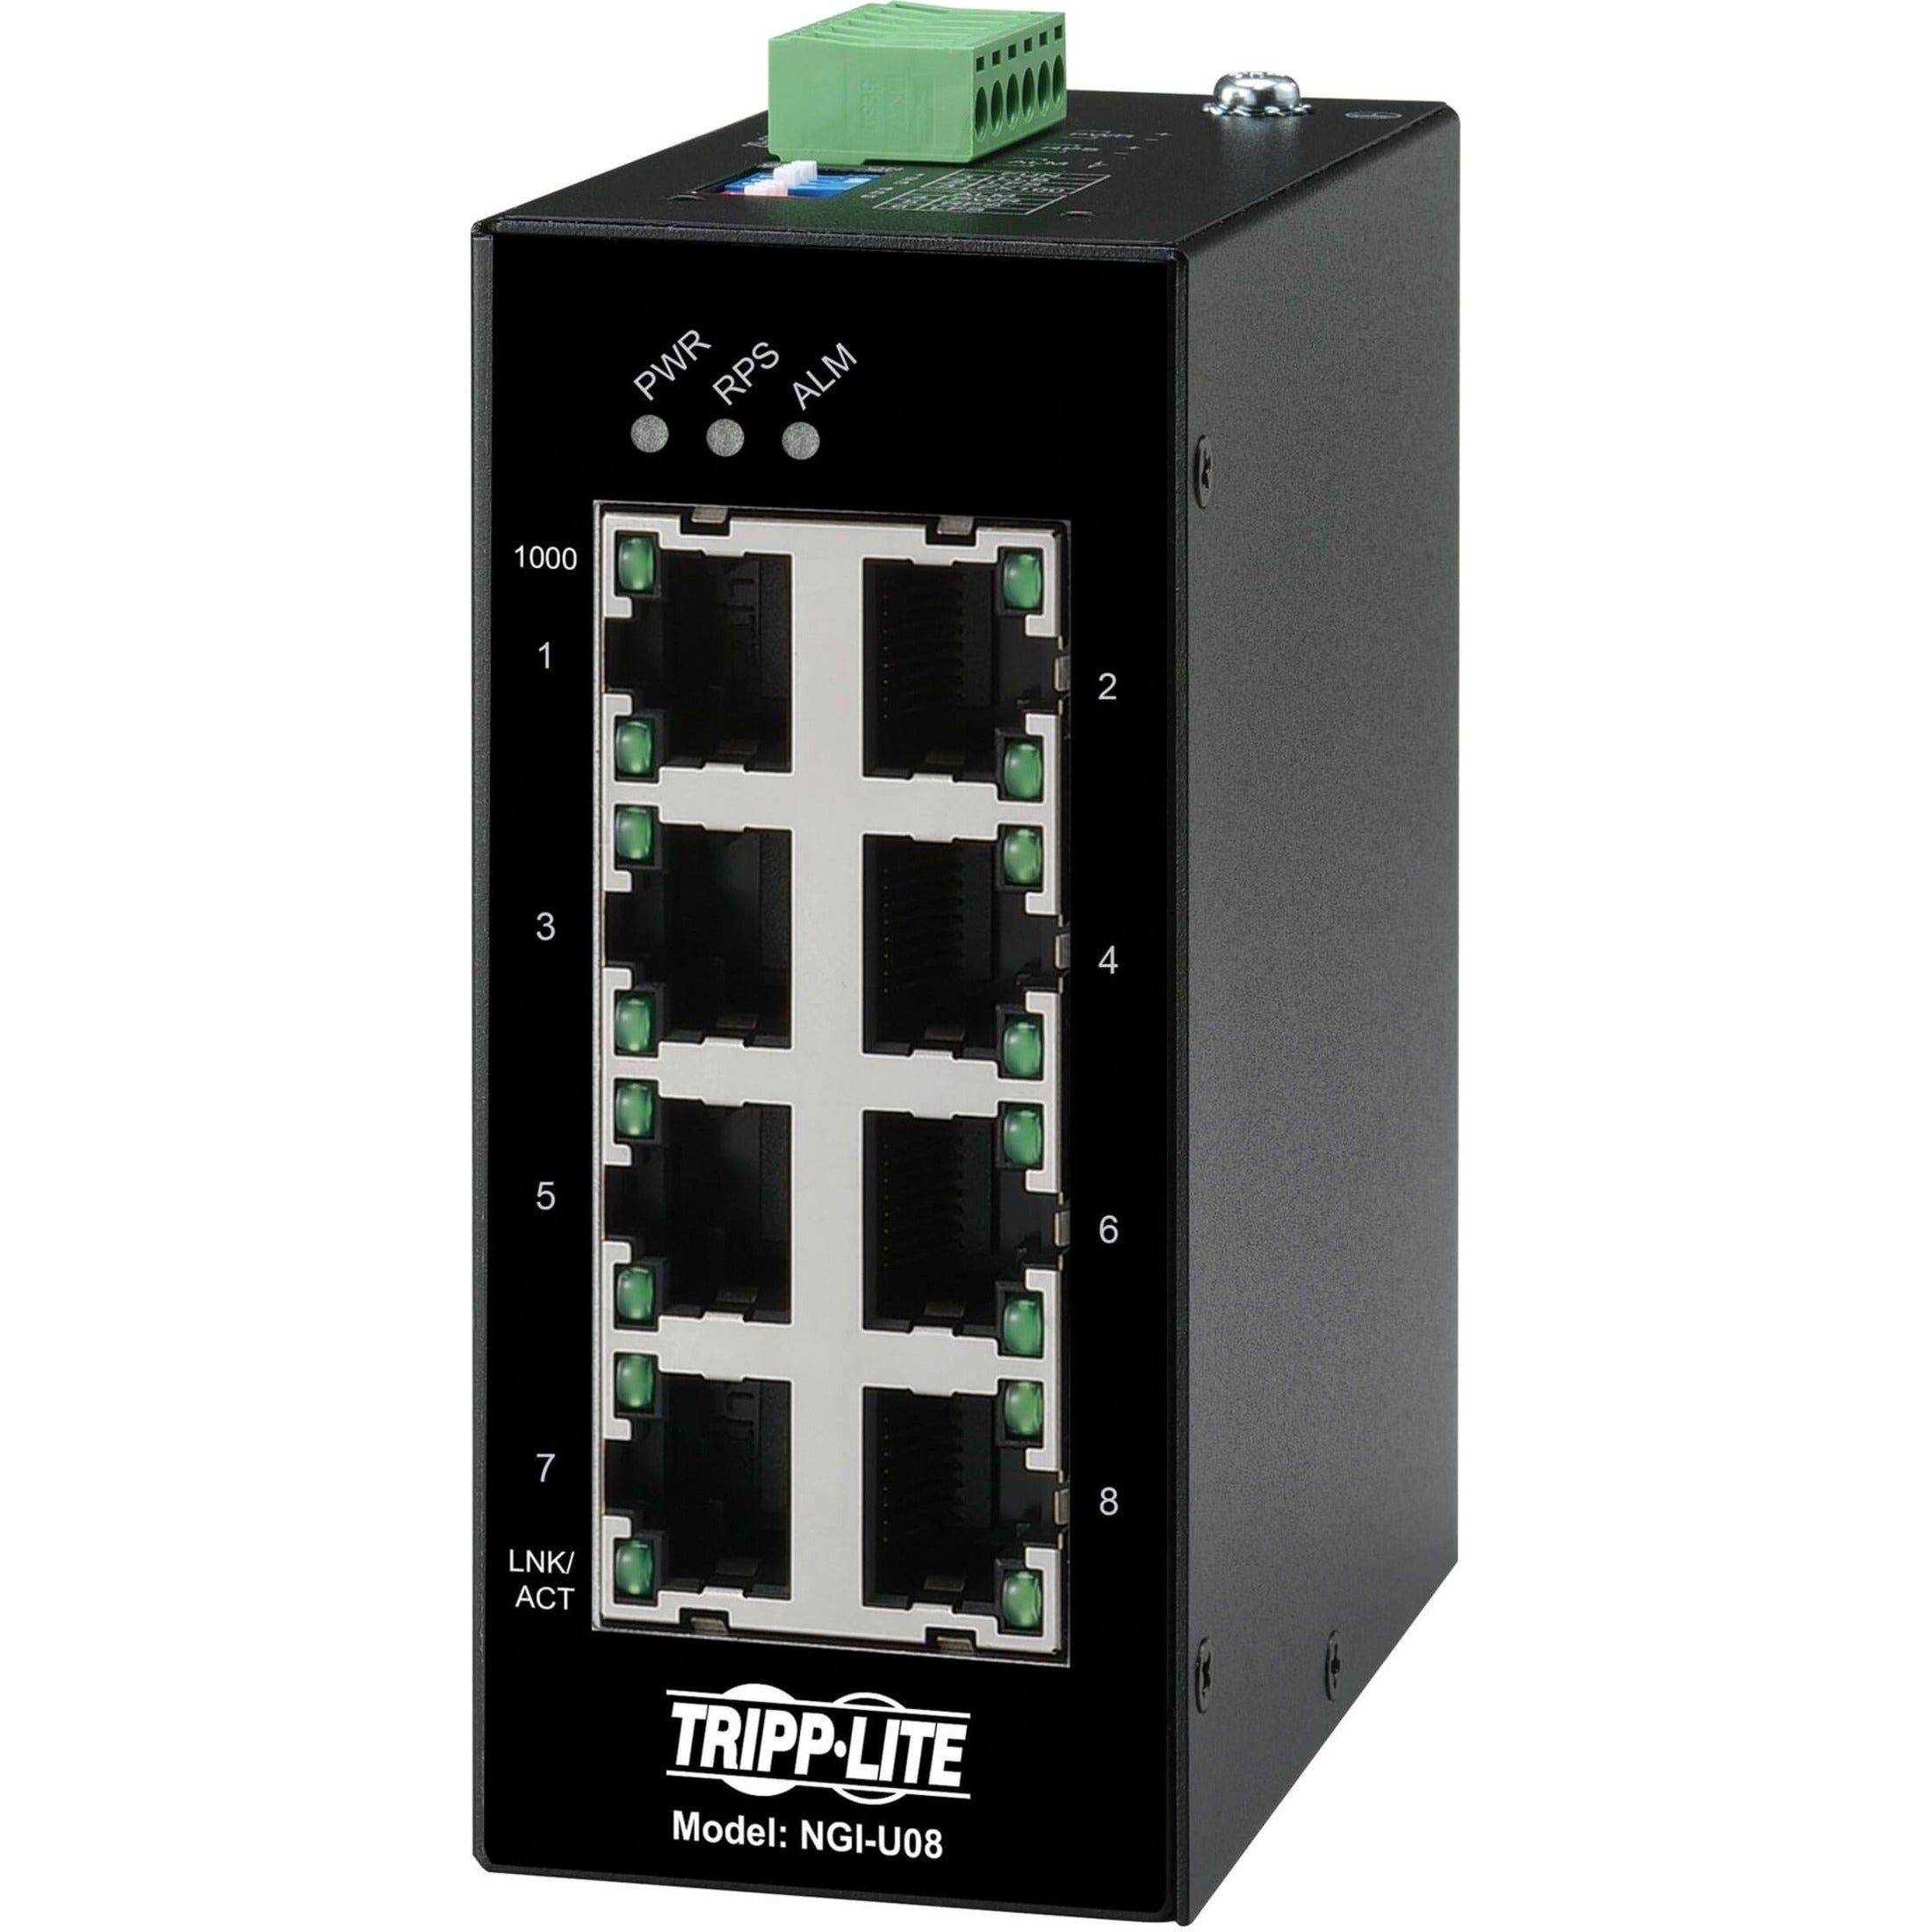 Tripp Lite NGI-U08 Ethernet Switch Unmanaged 8-Port Industrial 10/100/1000 Mbps DIN TAA Compliant  Tripp Lite NGI-U08 Switch Ethernet non gestito 8-Port Industriale 10/100/1000 Mbps DIN Conforme a TAA